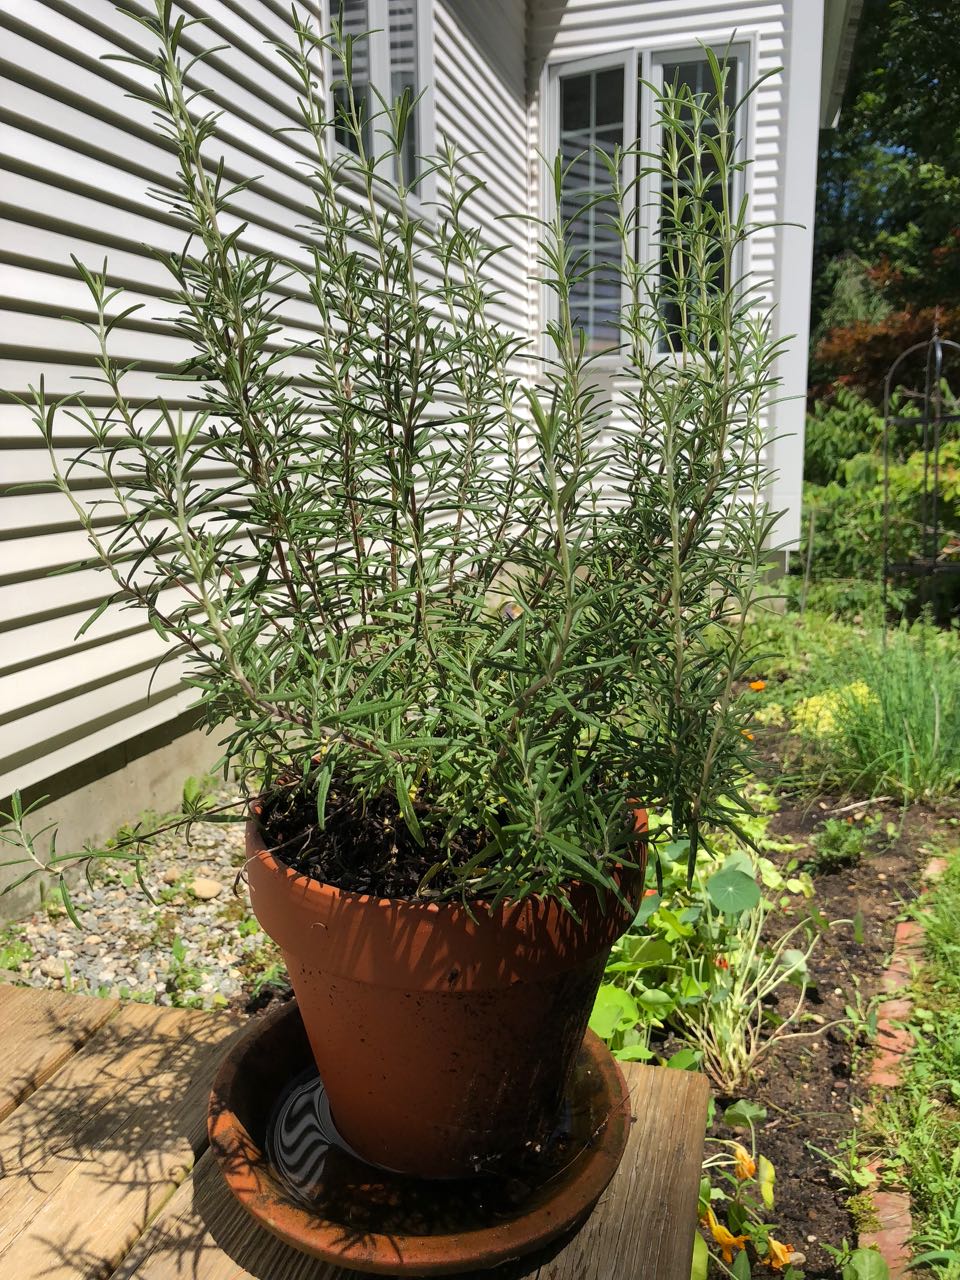 Since rosemary does not winter over, this one is in a pot. It will come in before the first frost and probably become a topiary of some shape. I have scissors and am not afraid to use them!